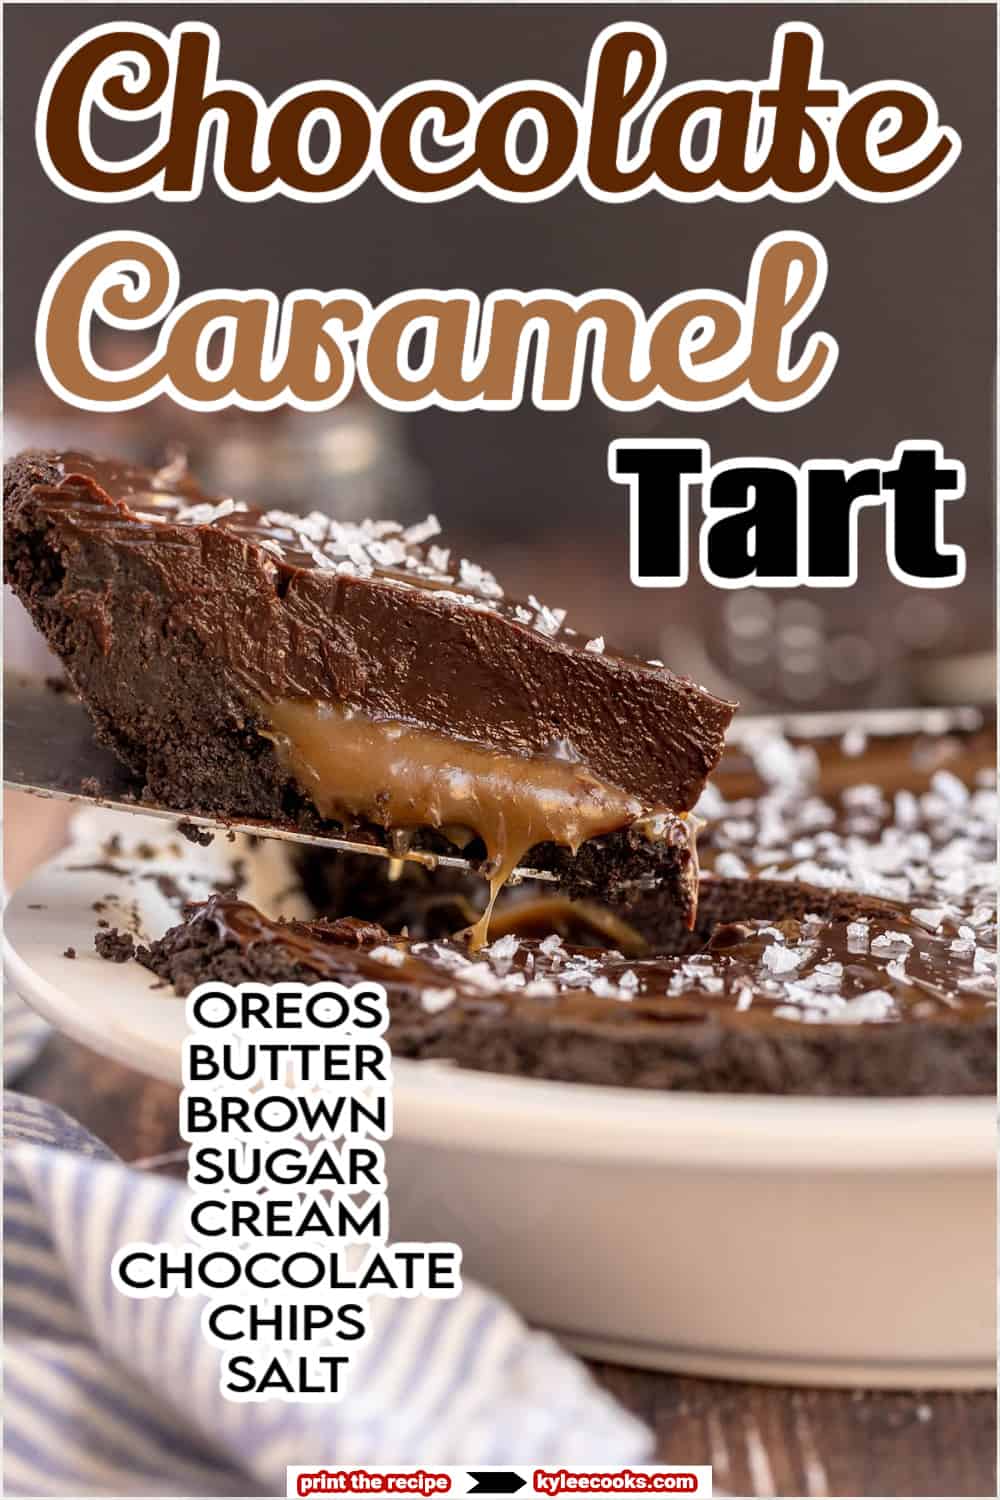 Chocolate Caramel tart in a pie plate with a slice being removed.